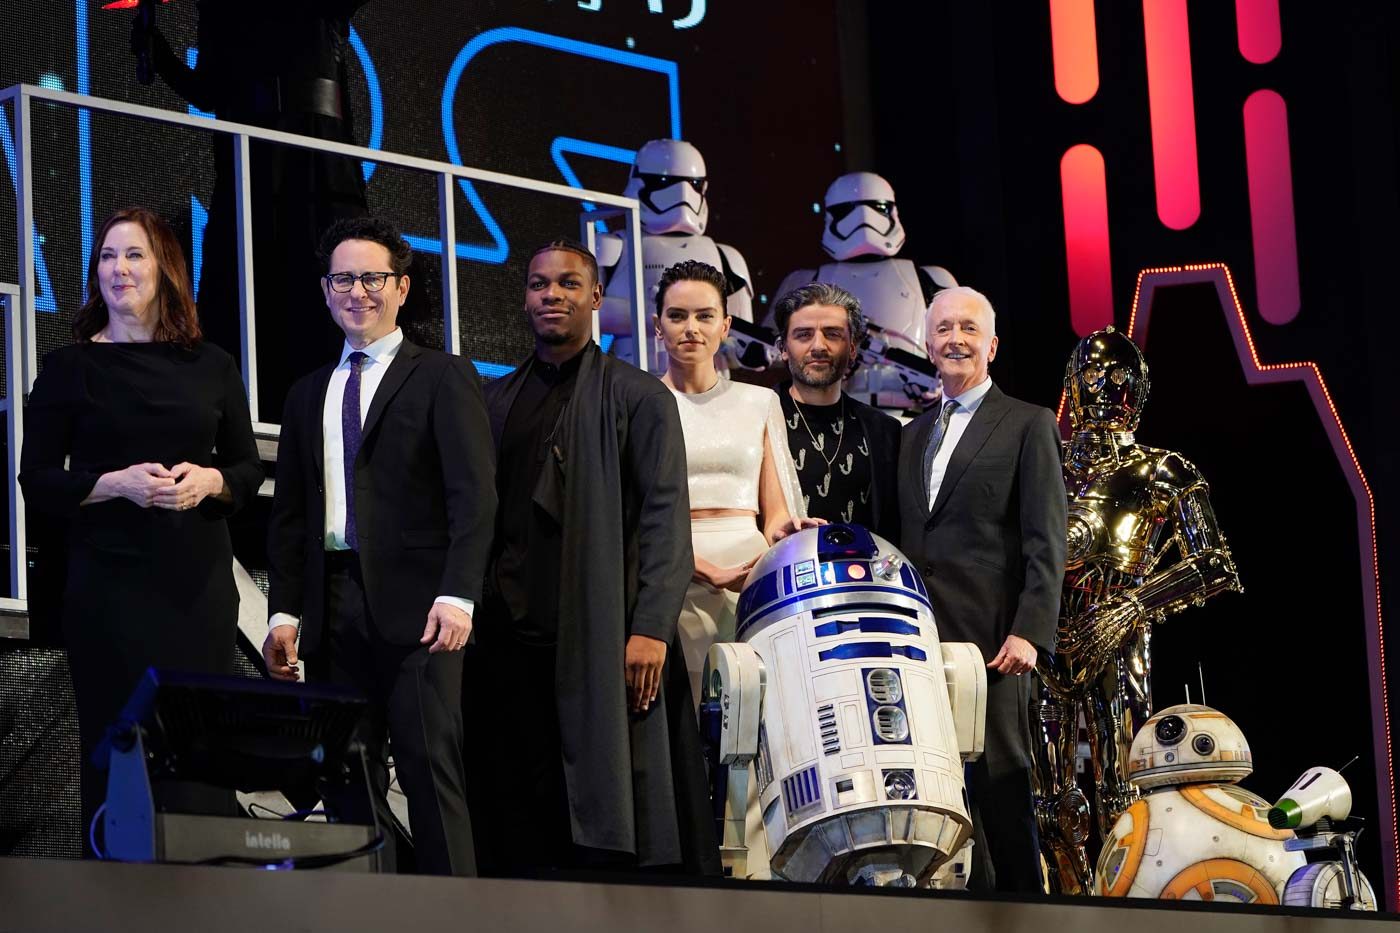 After ‘Rise of Skywalker,’ what’s next for ‘Star Wars?’